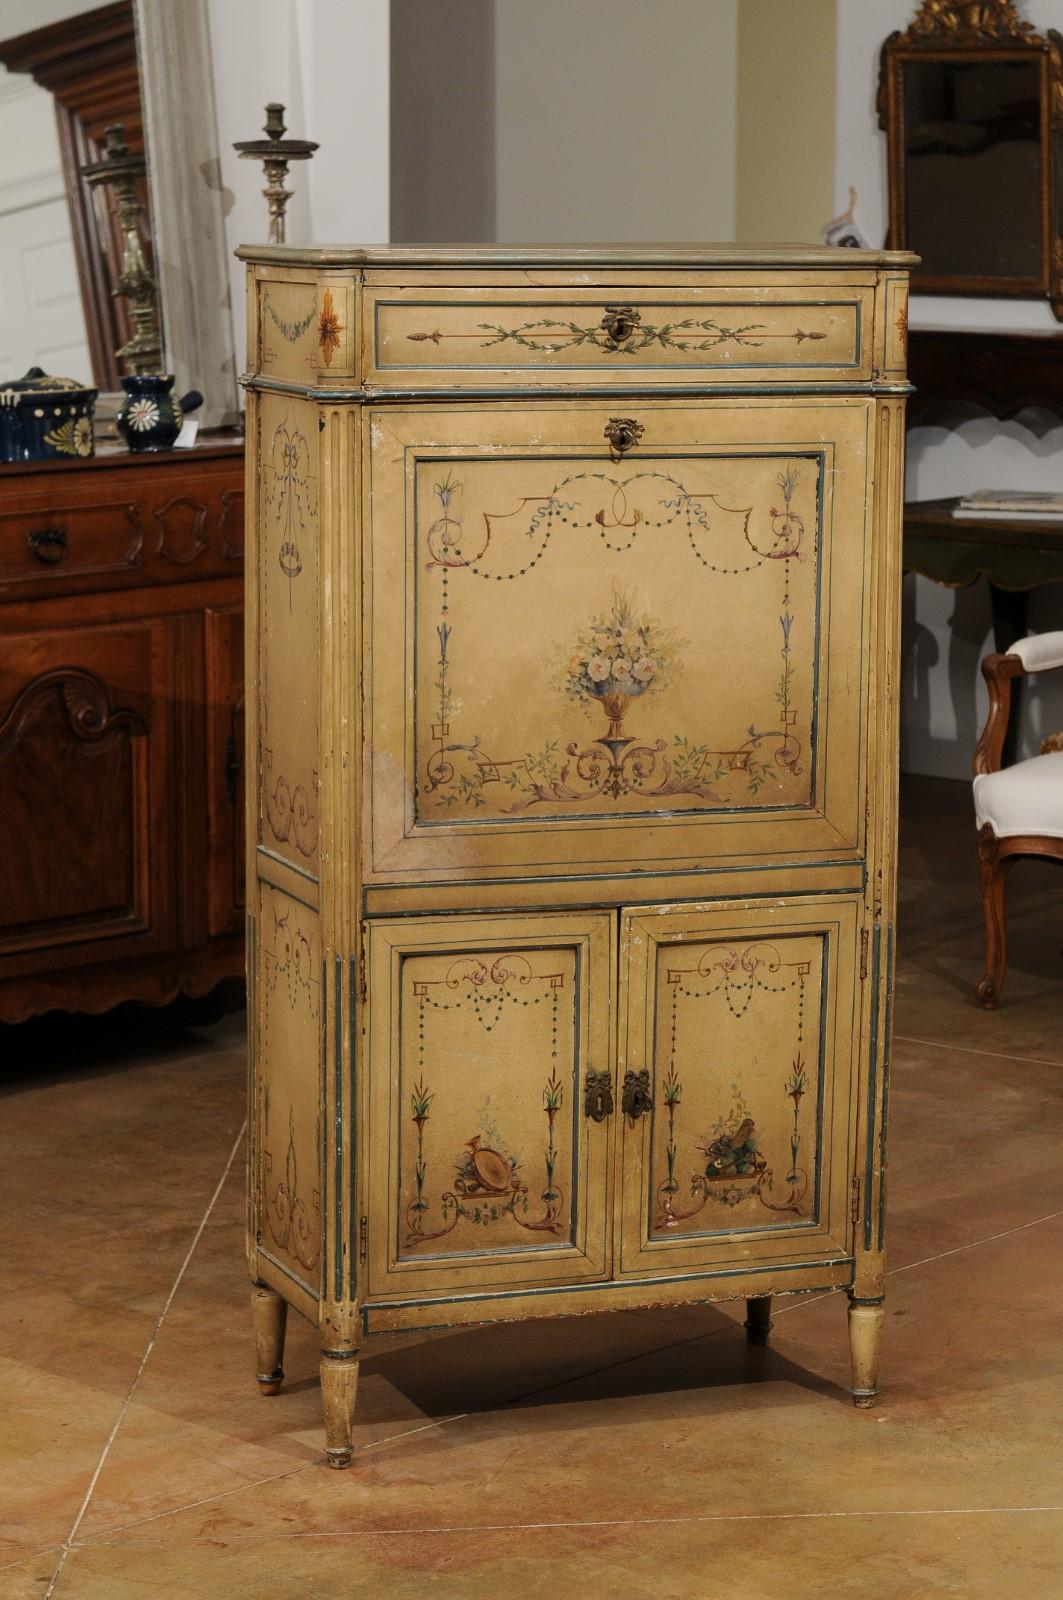 A French Neoclassical style painted secretary from the 19th century, with flowers, arabesques, musical instruments and birds. Created in France during the 19th century, this painted secrétaire features a narrow drawer at the top sitting above a drop